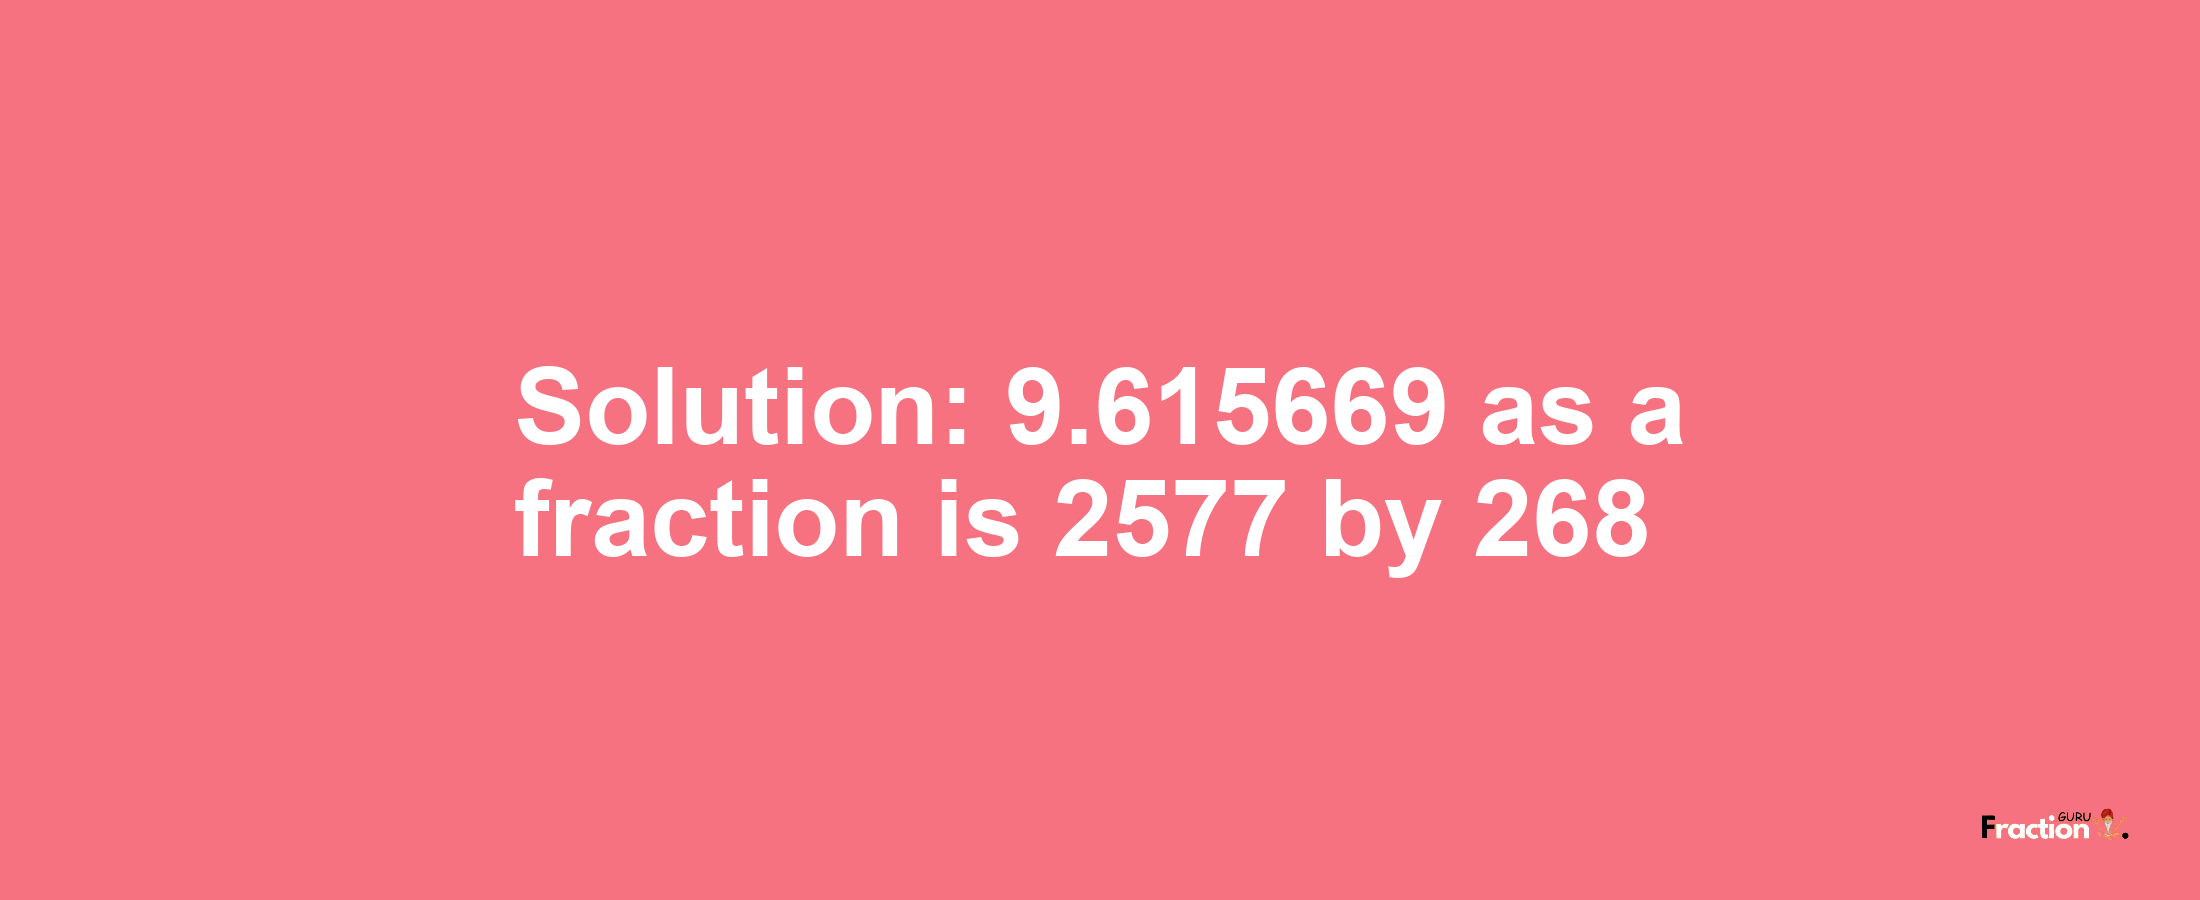 Solution:9.615669 as a fraction is 2577/268